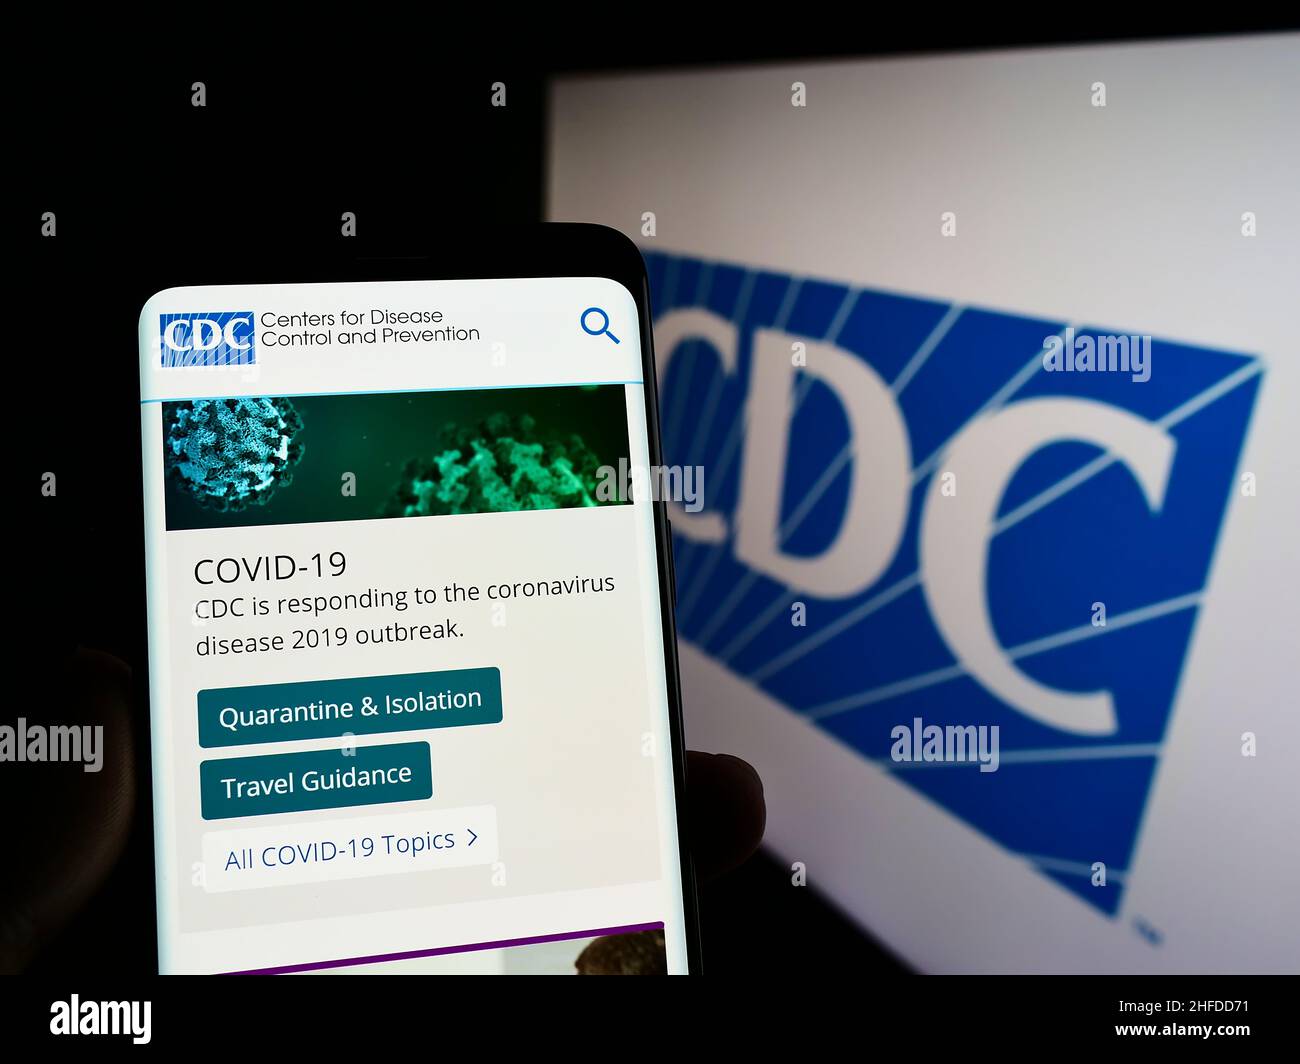 Person holding smartphone with website of Centers for Disease Control and Prevention (CDC) on screen with logo. Focus on center of phone display. Stock Photo